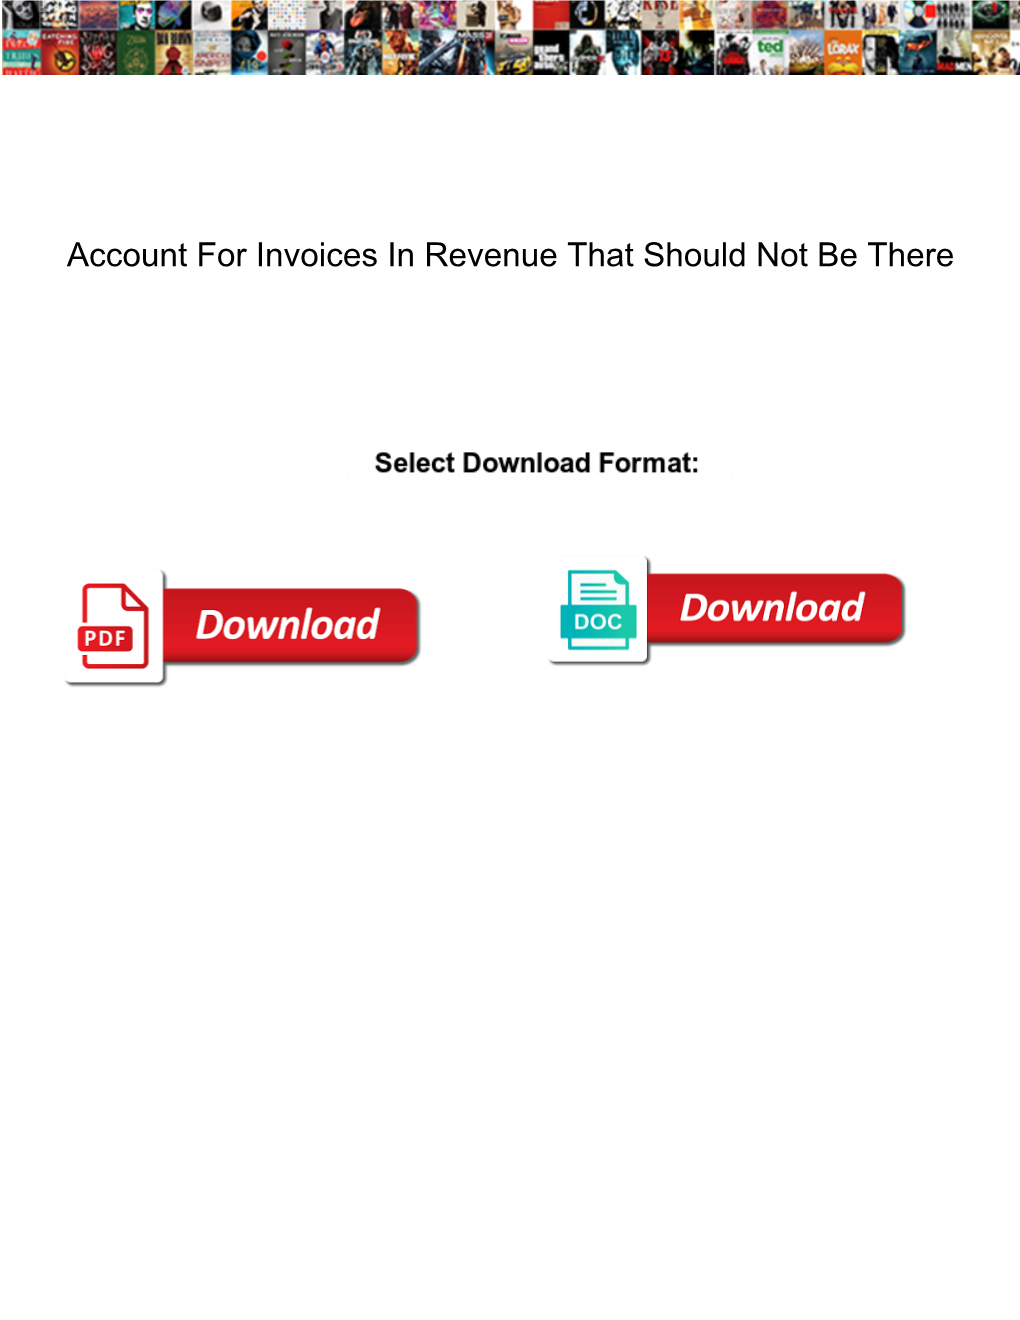 Account for Invoices in Revenue That Should Not Be There